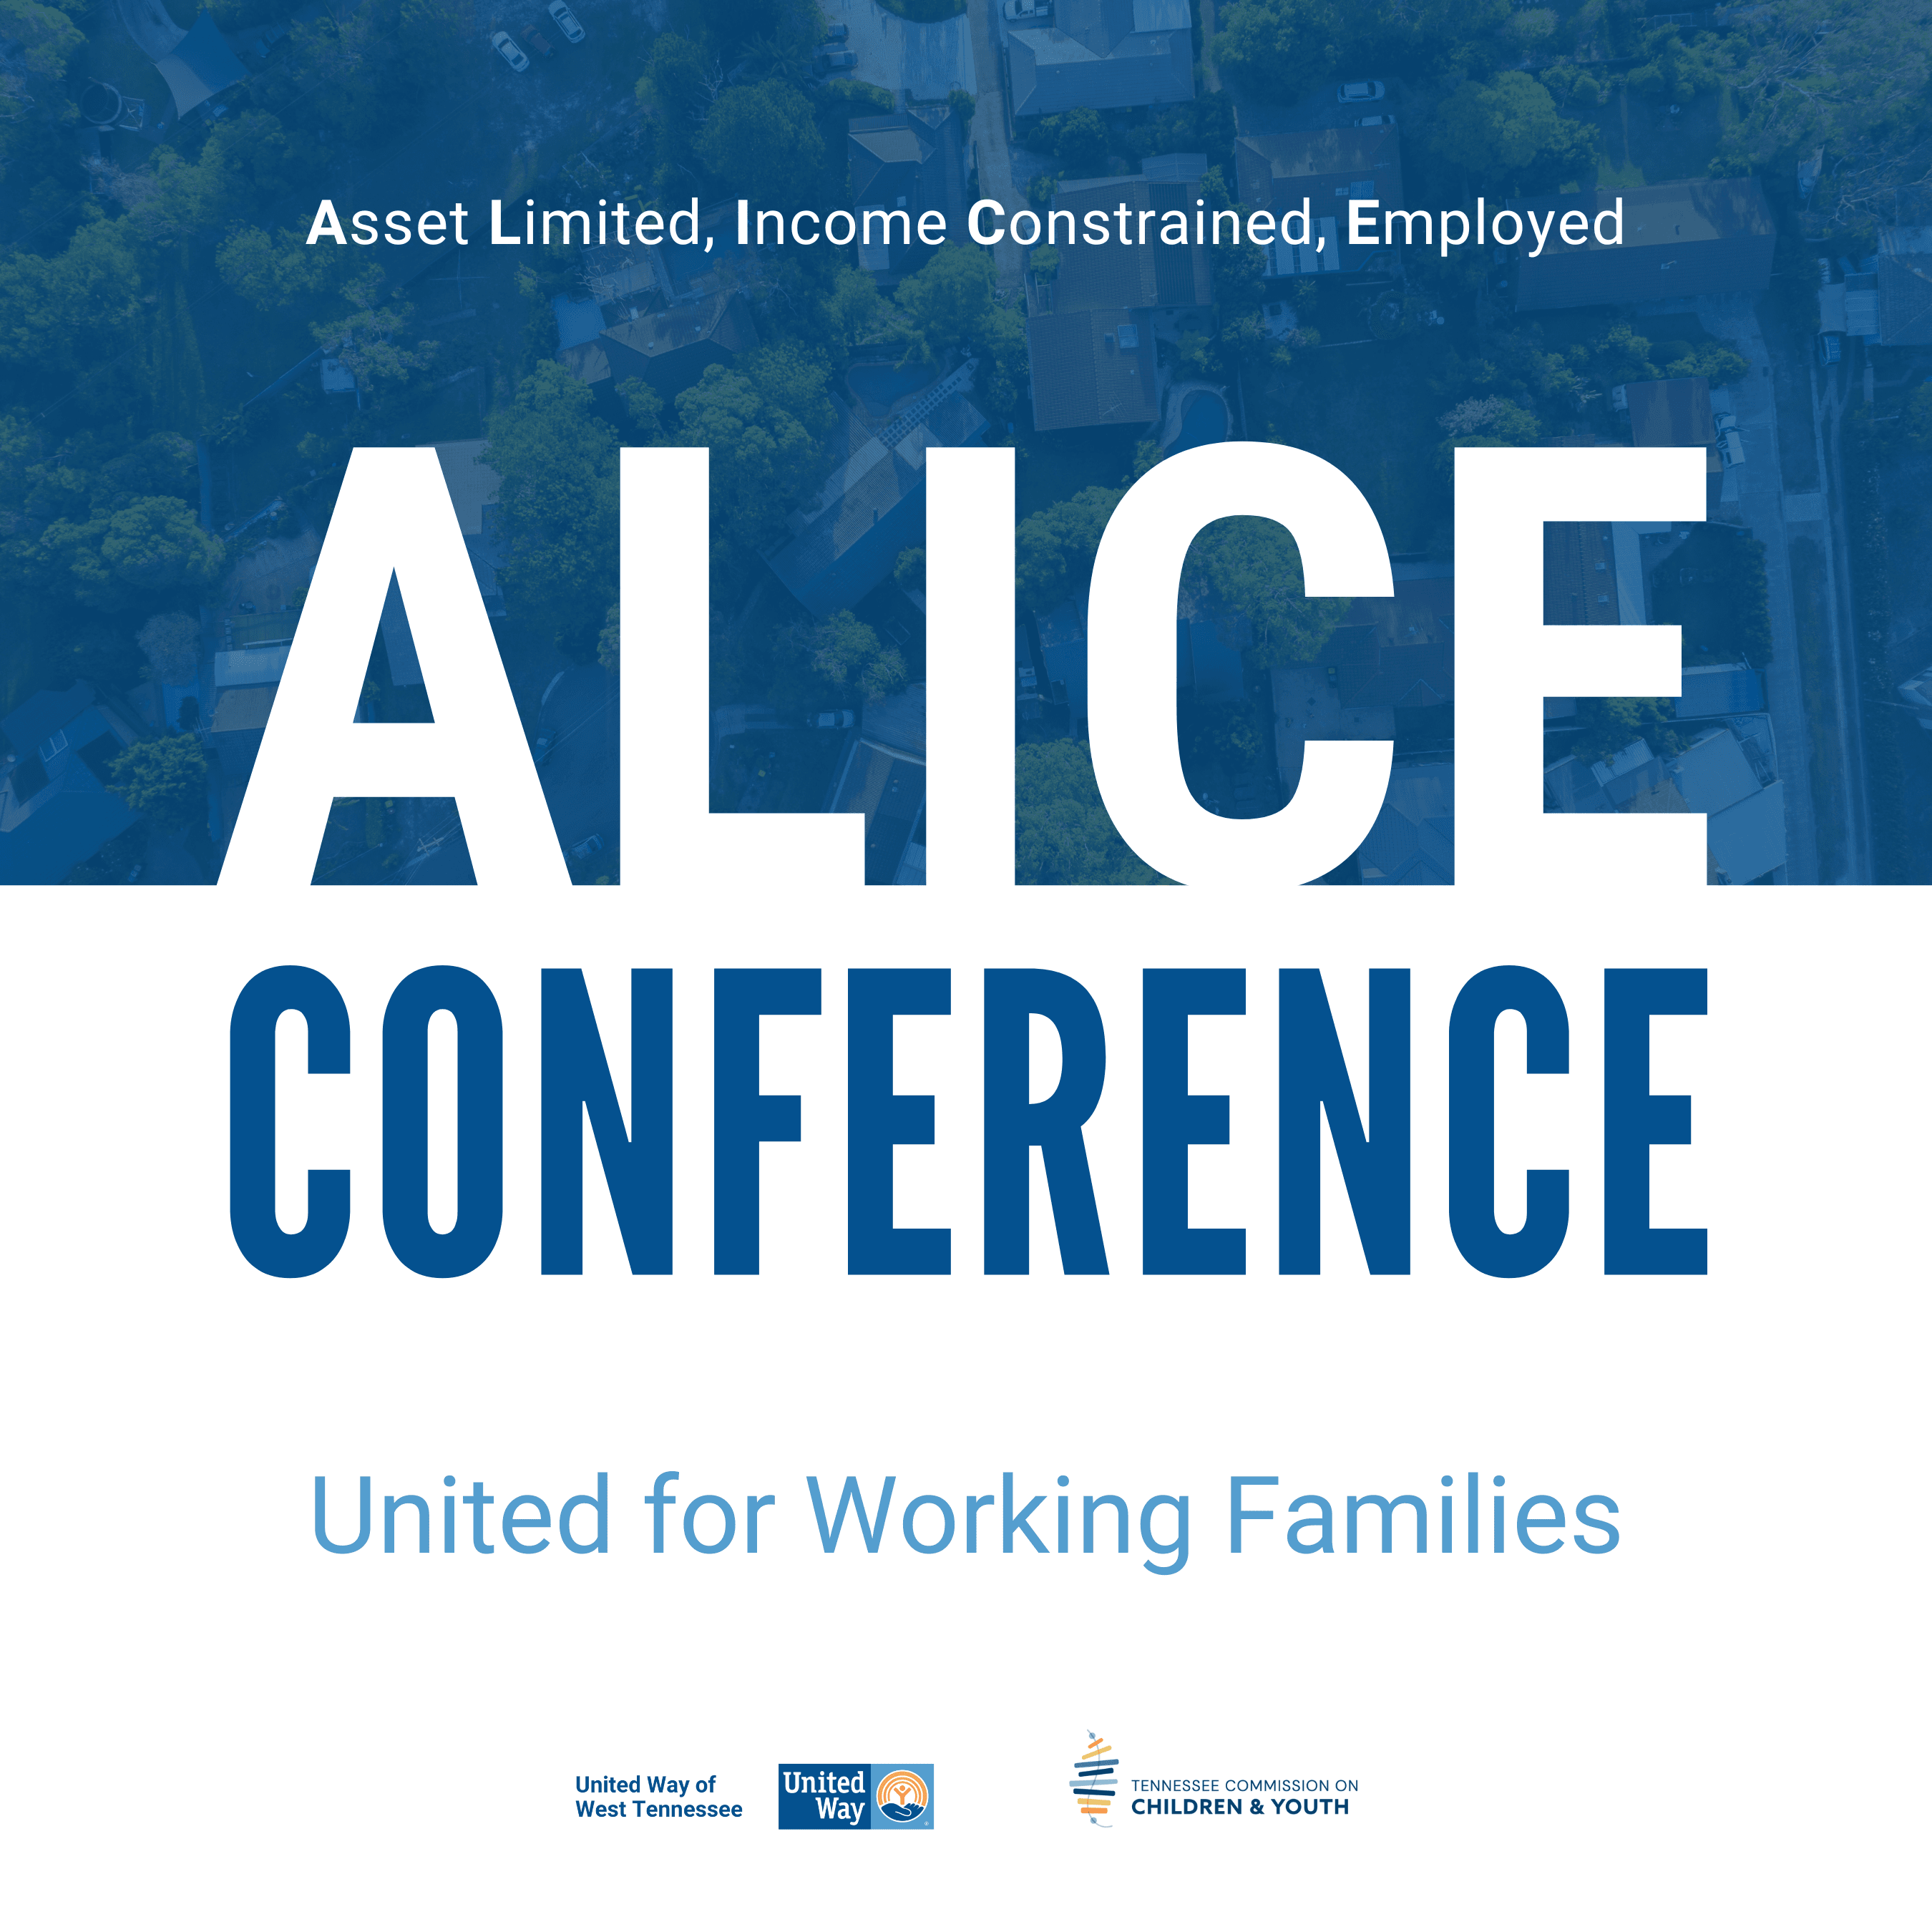 United Way of West TN and TN Commission on Children & Youth to Host ALICE Conference